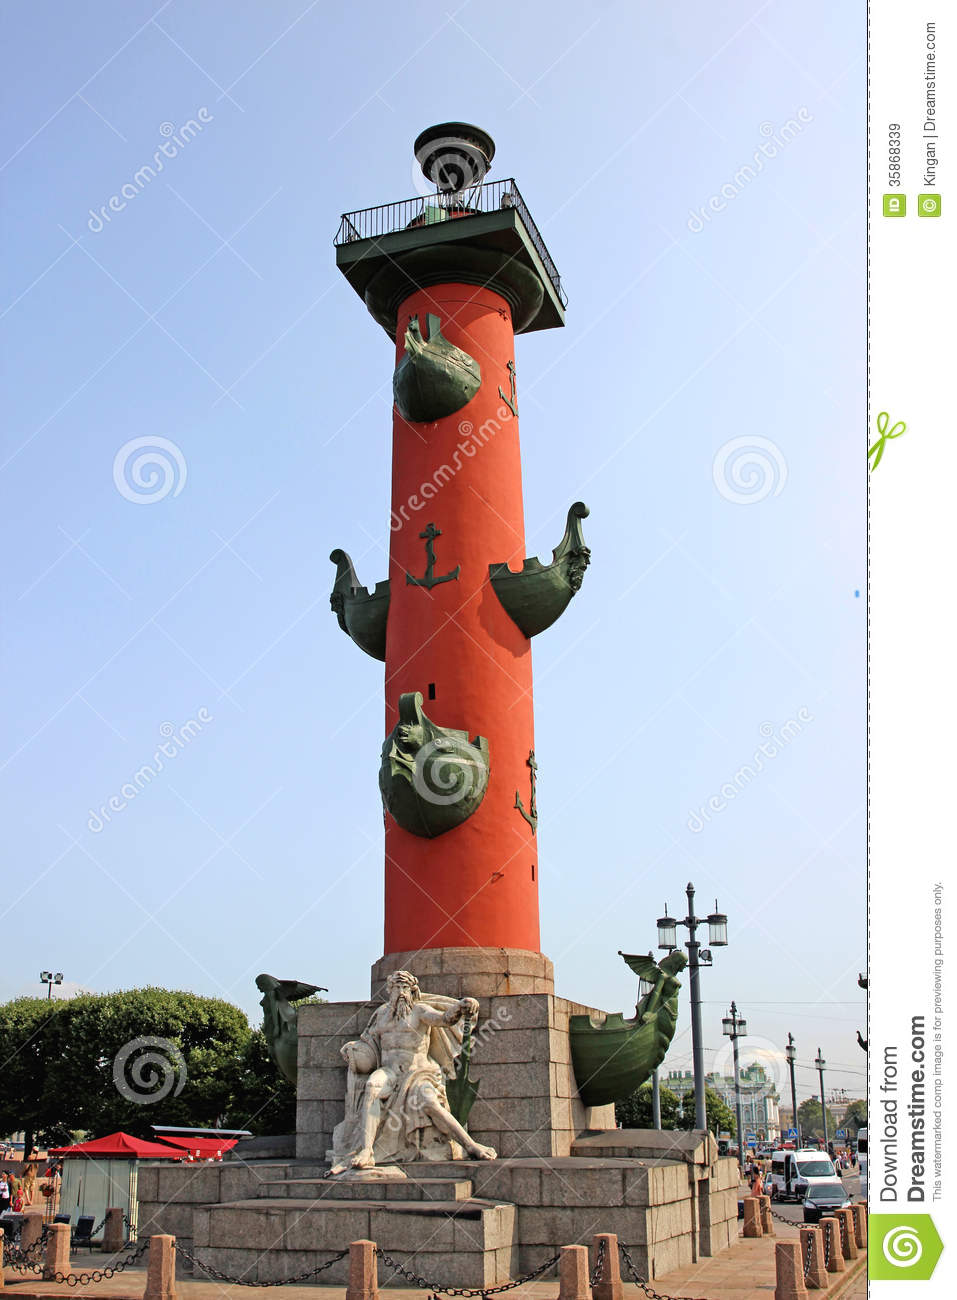 Rostral Columns In St. Petersburg Royalty Free Stock Images.